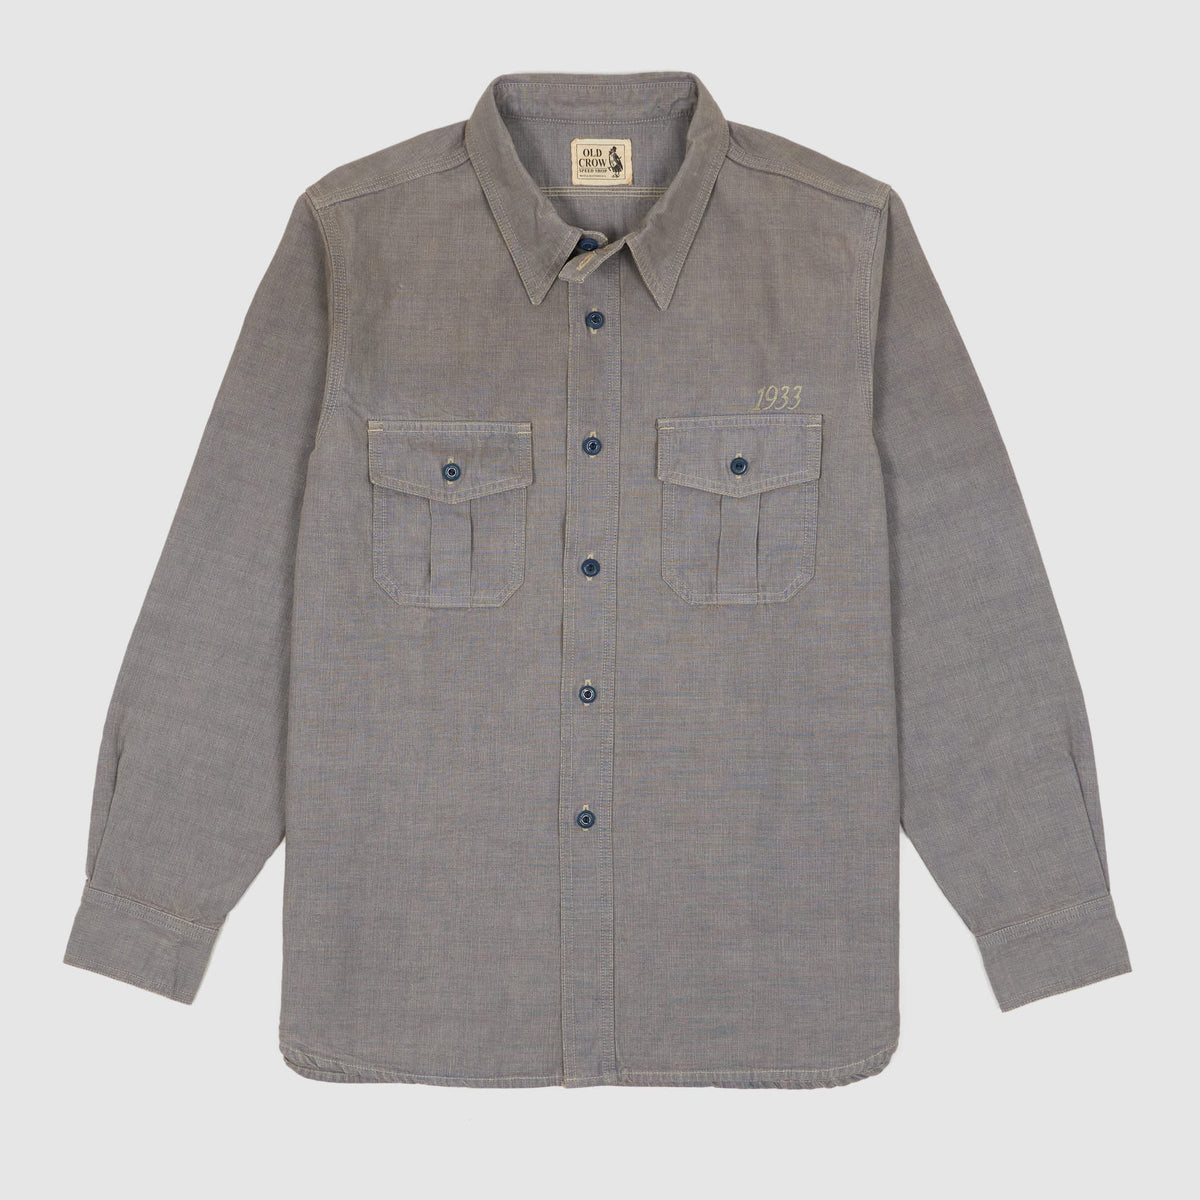 Old Crow Speed Shop by Glad Hand &amp; Co. Embroidered Work Shirt